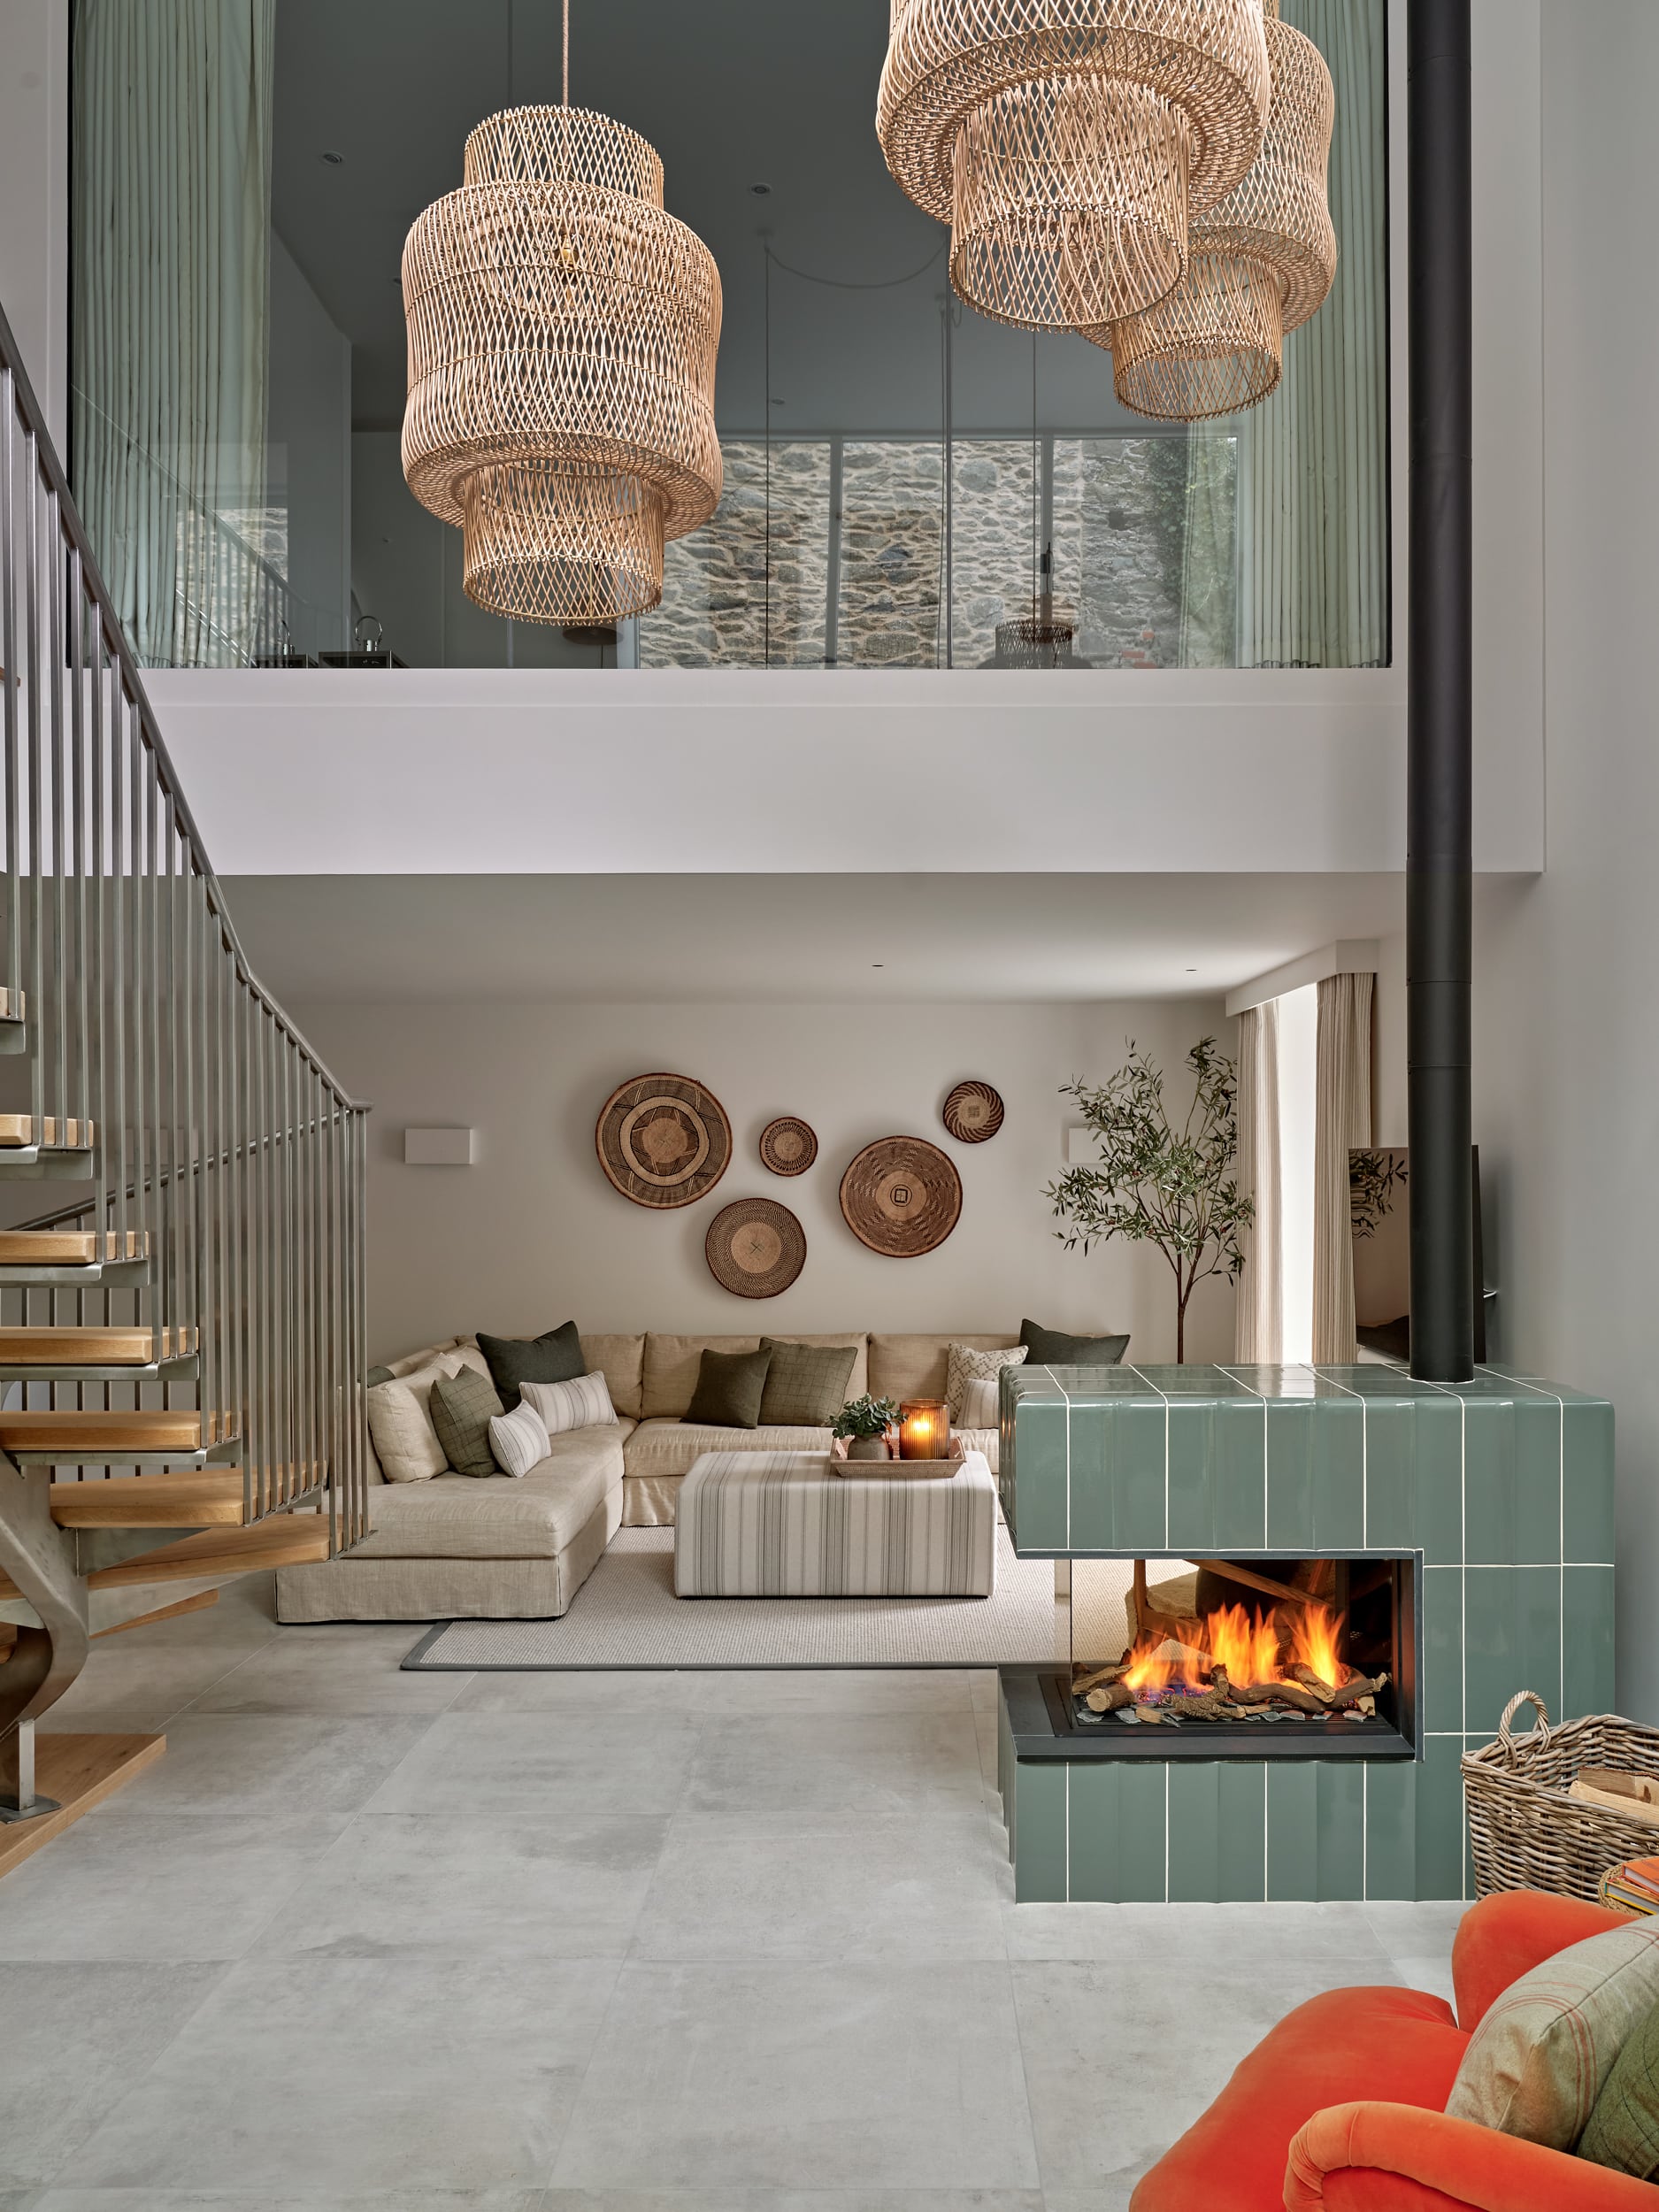 neutral coastal style living space with tiled fireplace in front.